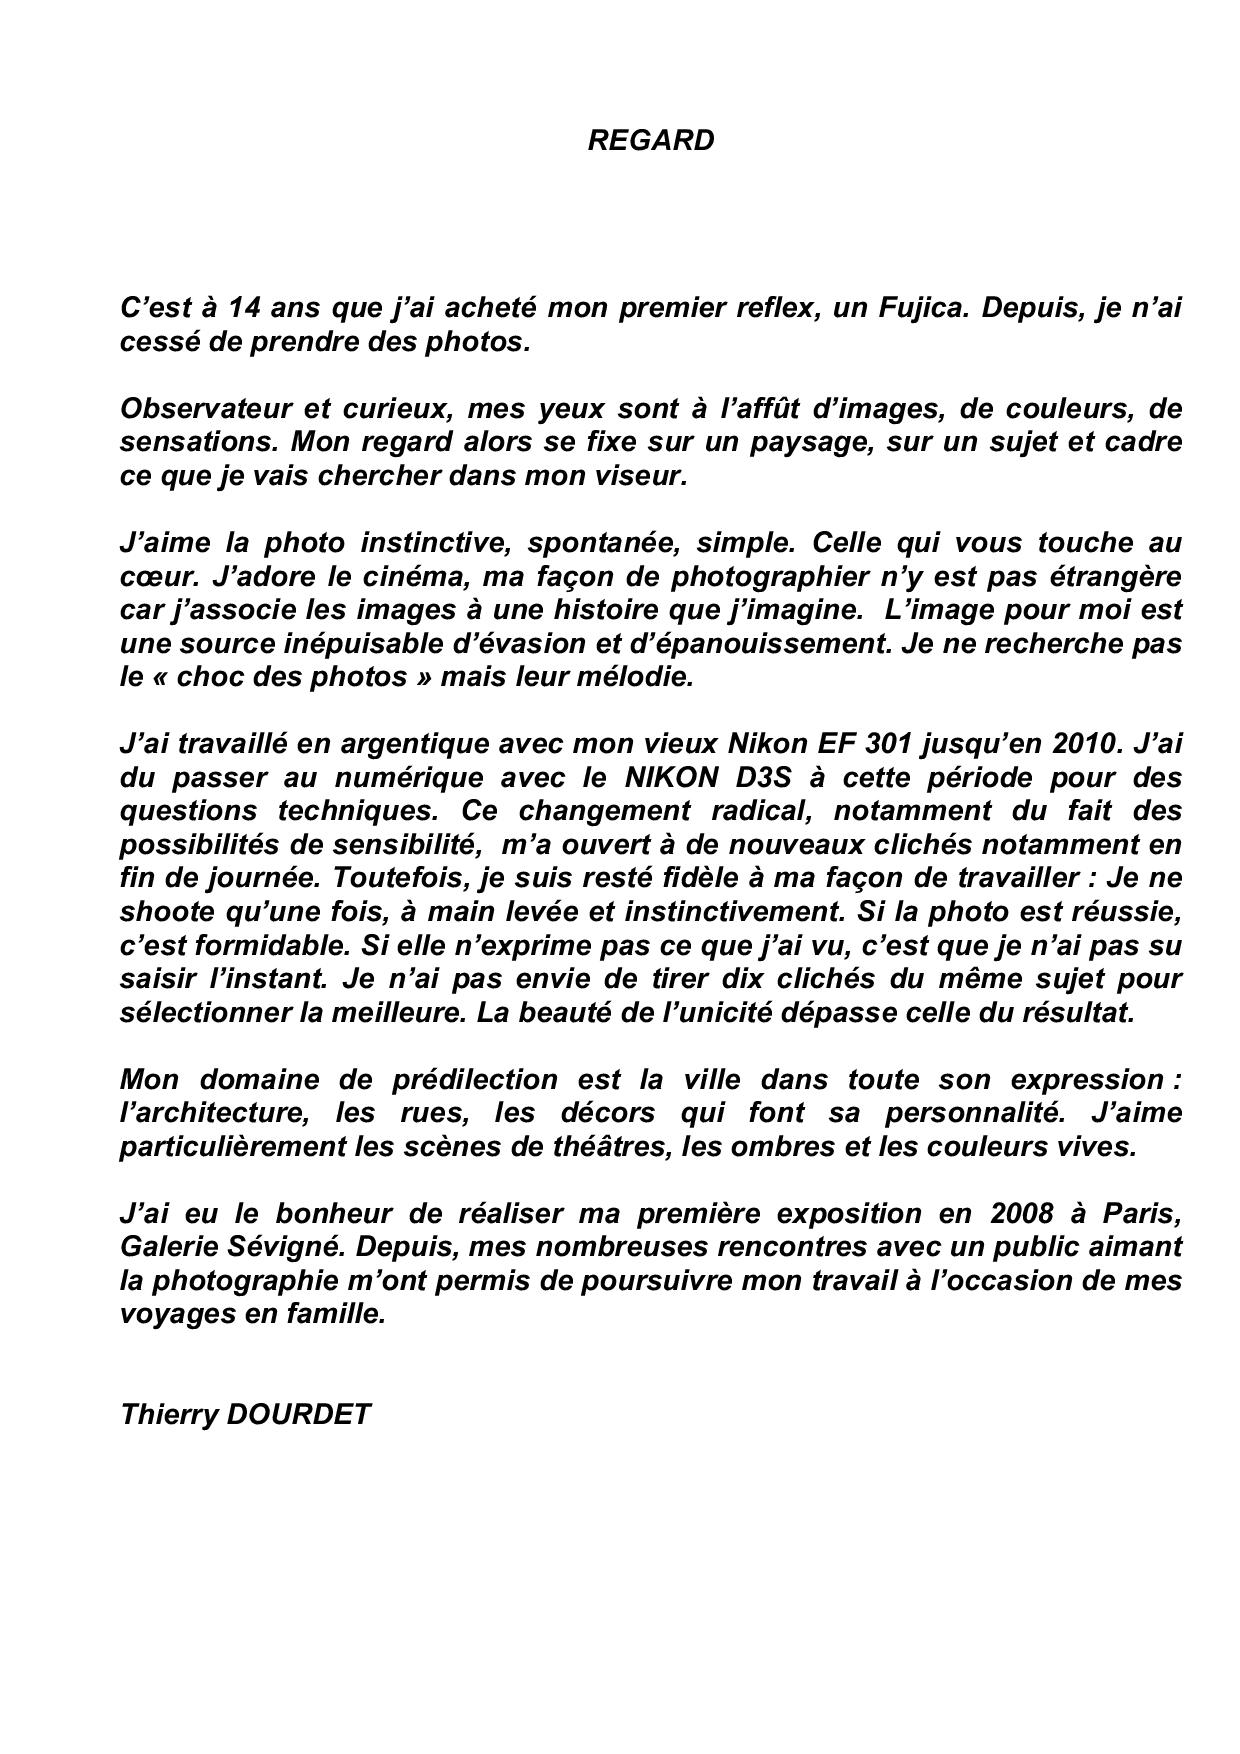 https://www.thierry-dourdet.com/wp-content/uploads/2021/04/Book-expo-2013-page-004.jpg